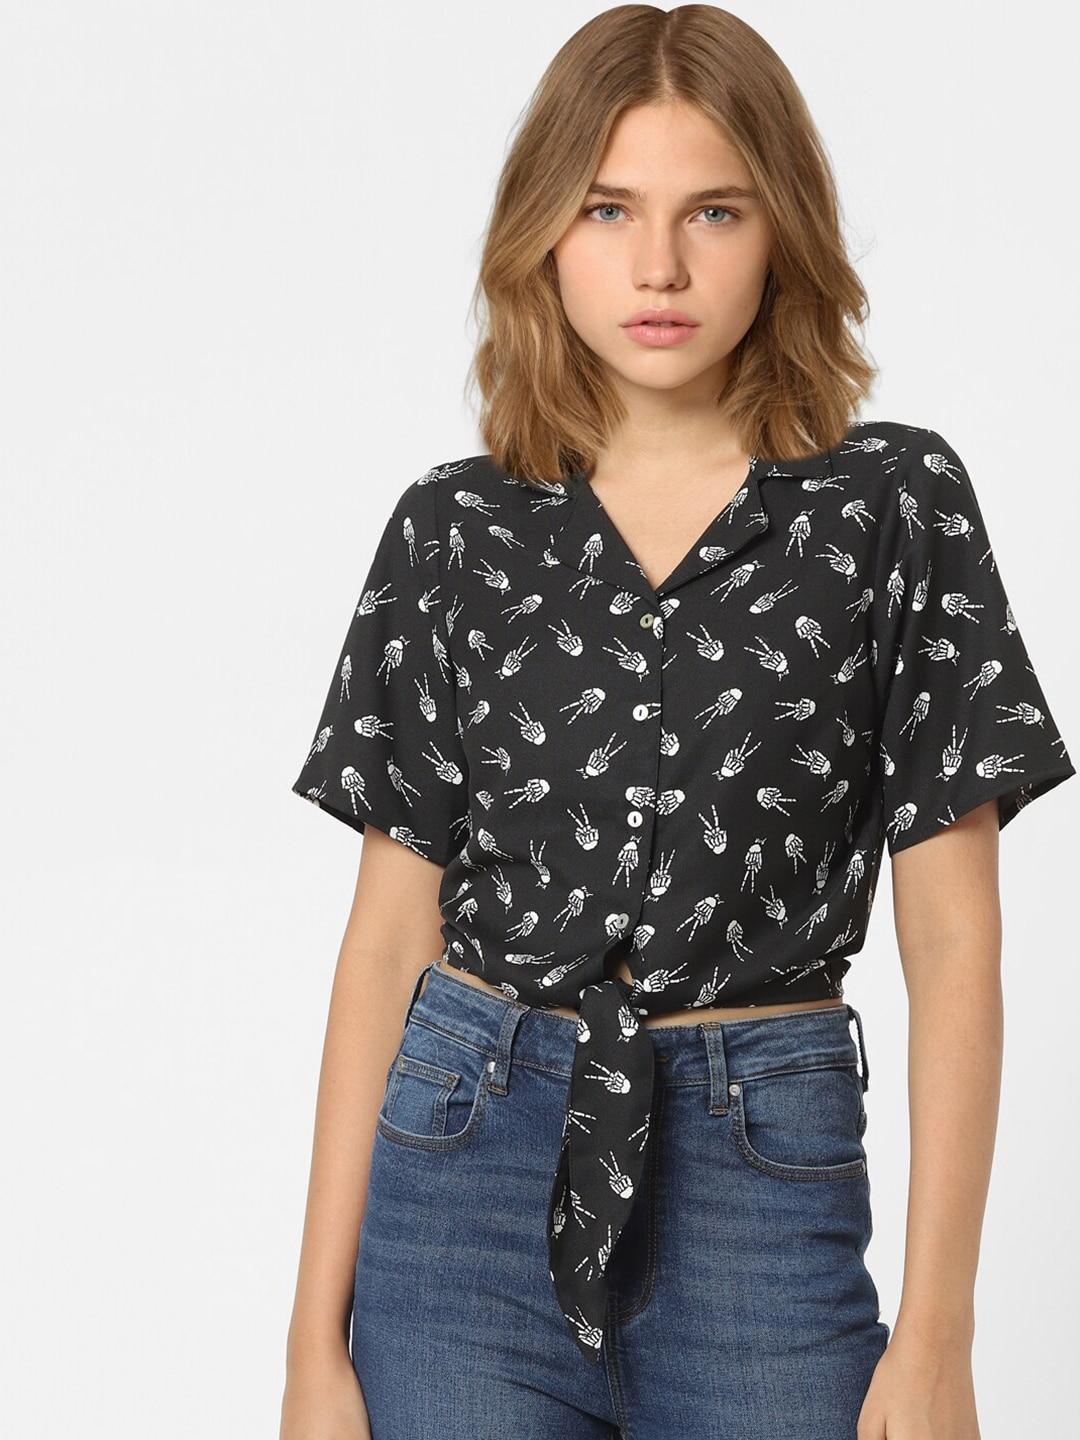 ONLY Women Black Graphic Printed Shirt Style Crop Top